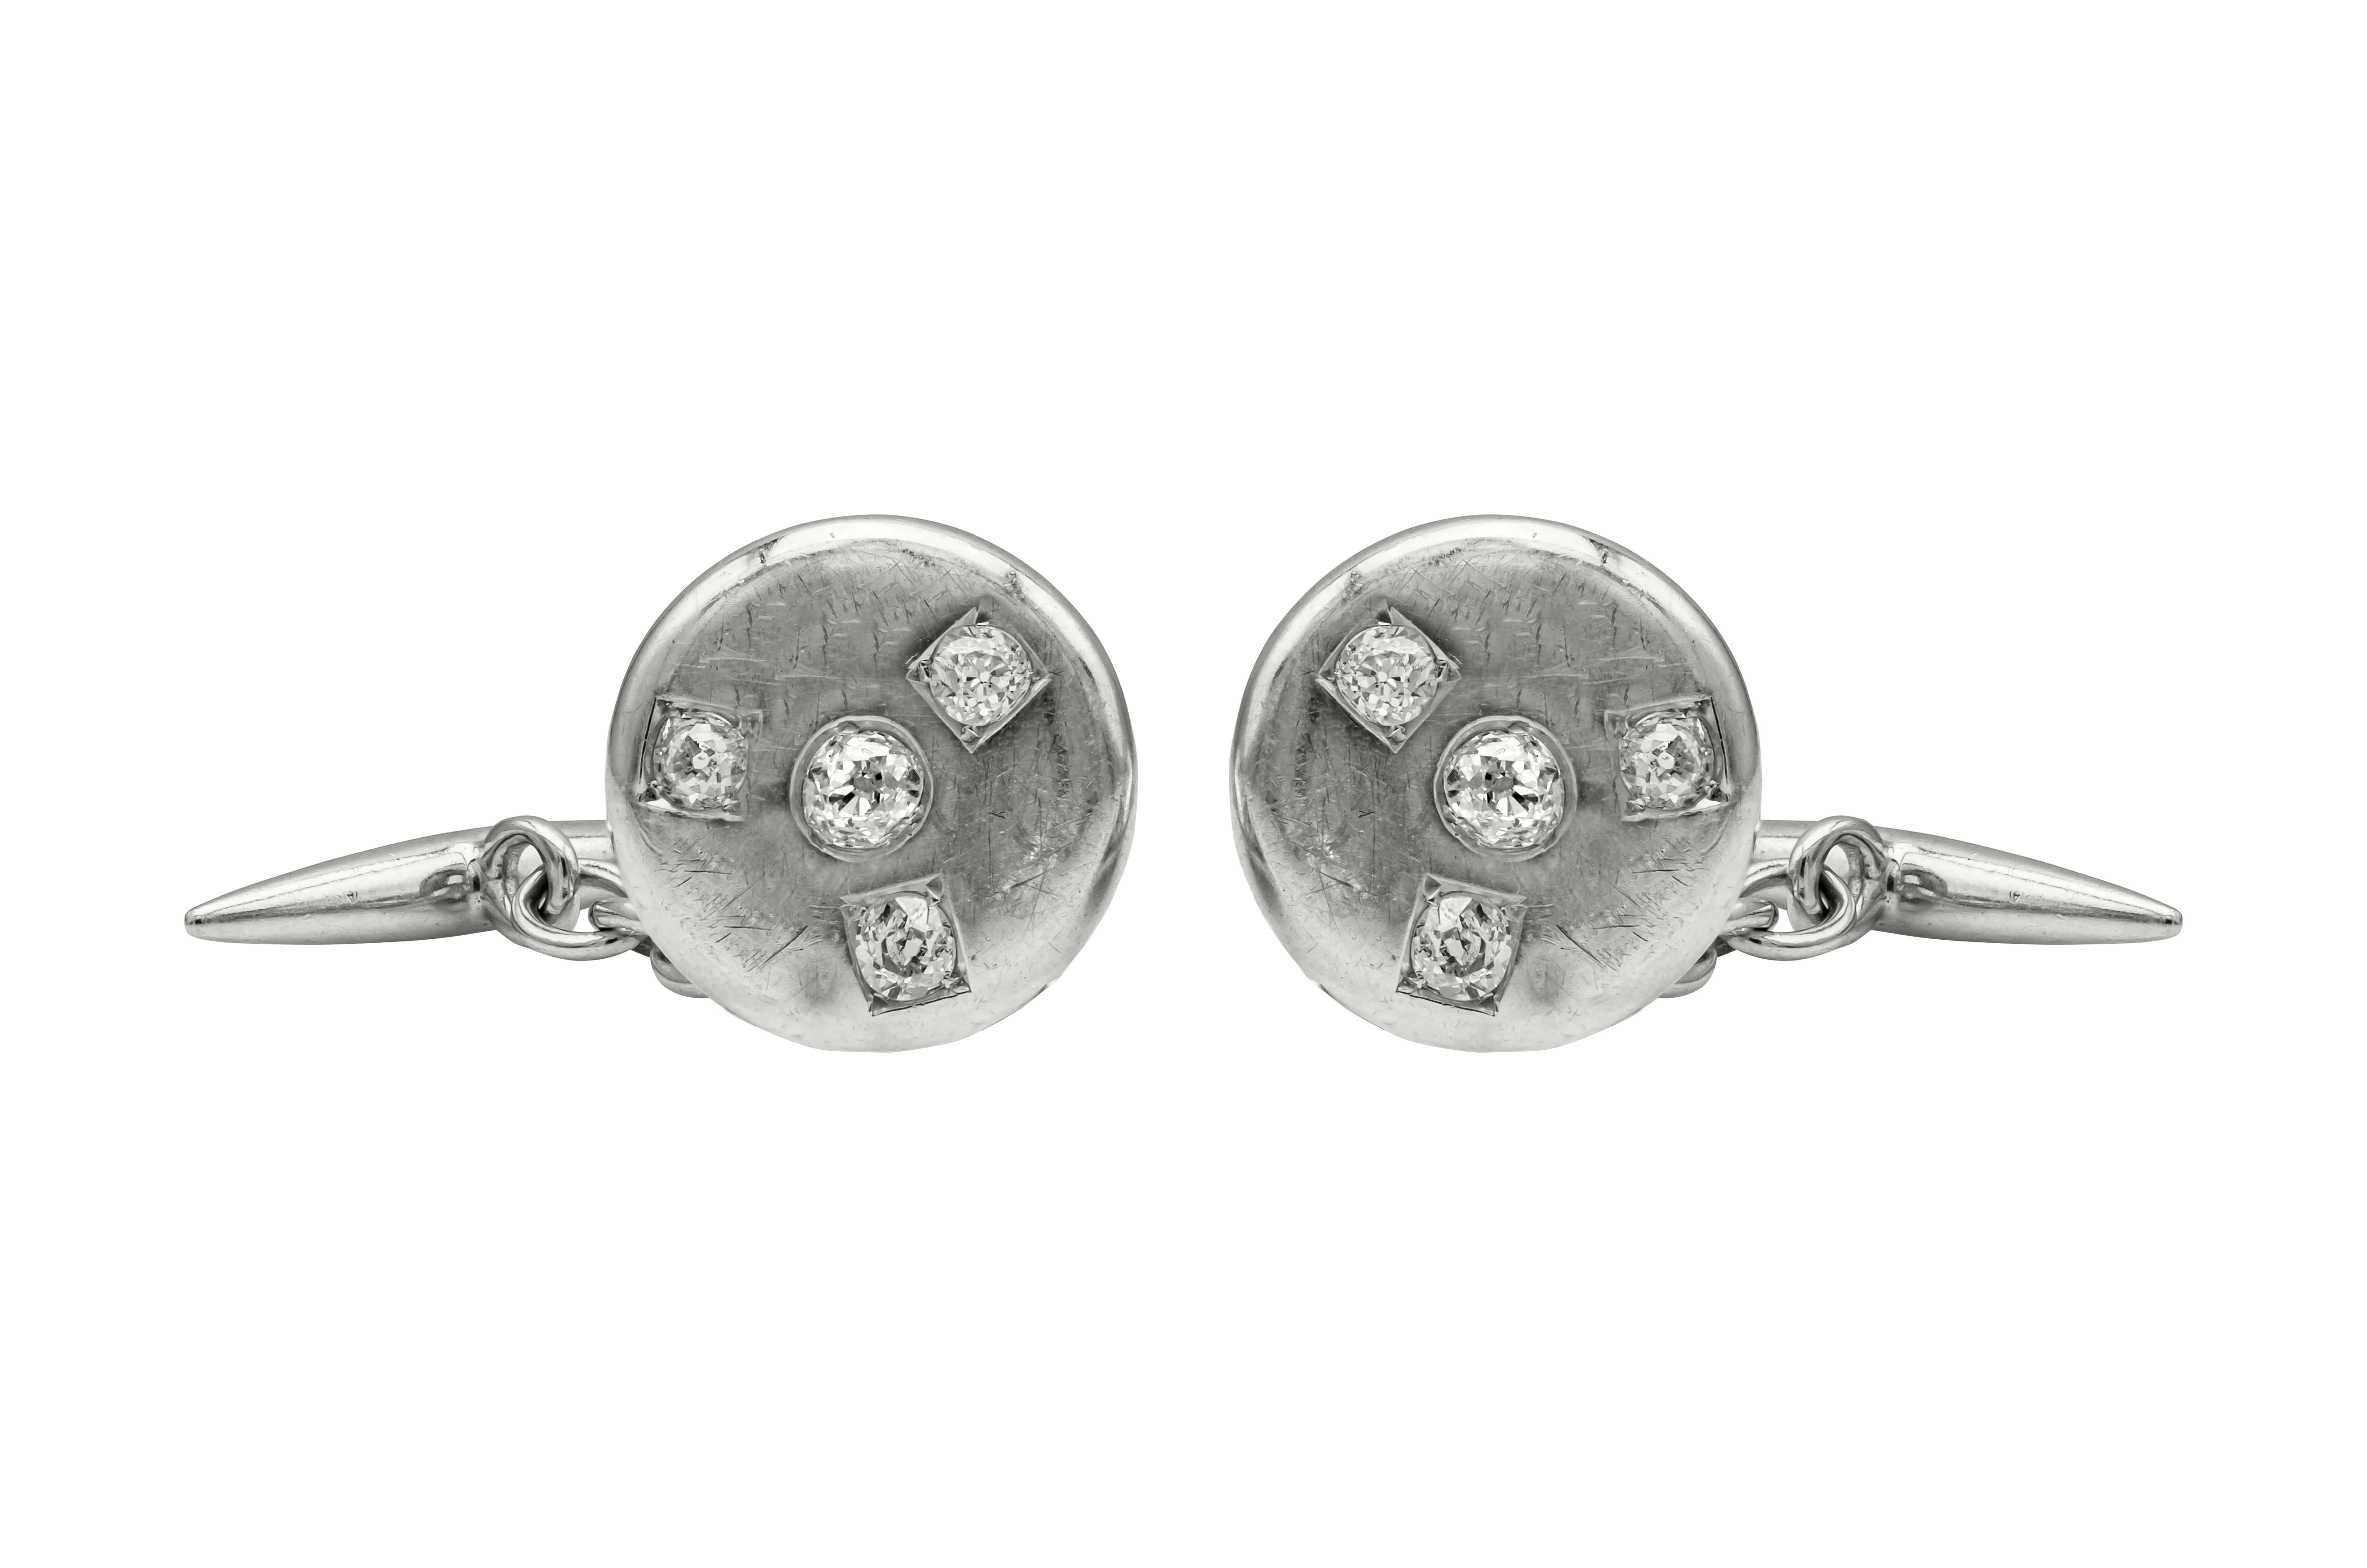 A vintage piece of men's cufflinks, accented with eight antique old European cut diamonds weighing 1 carat total set on a chain link design between the disc and bar. Finely made with 18K white gold.